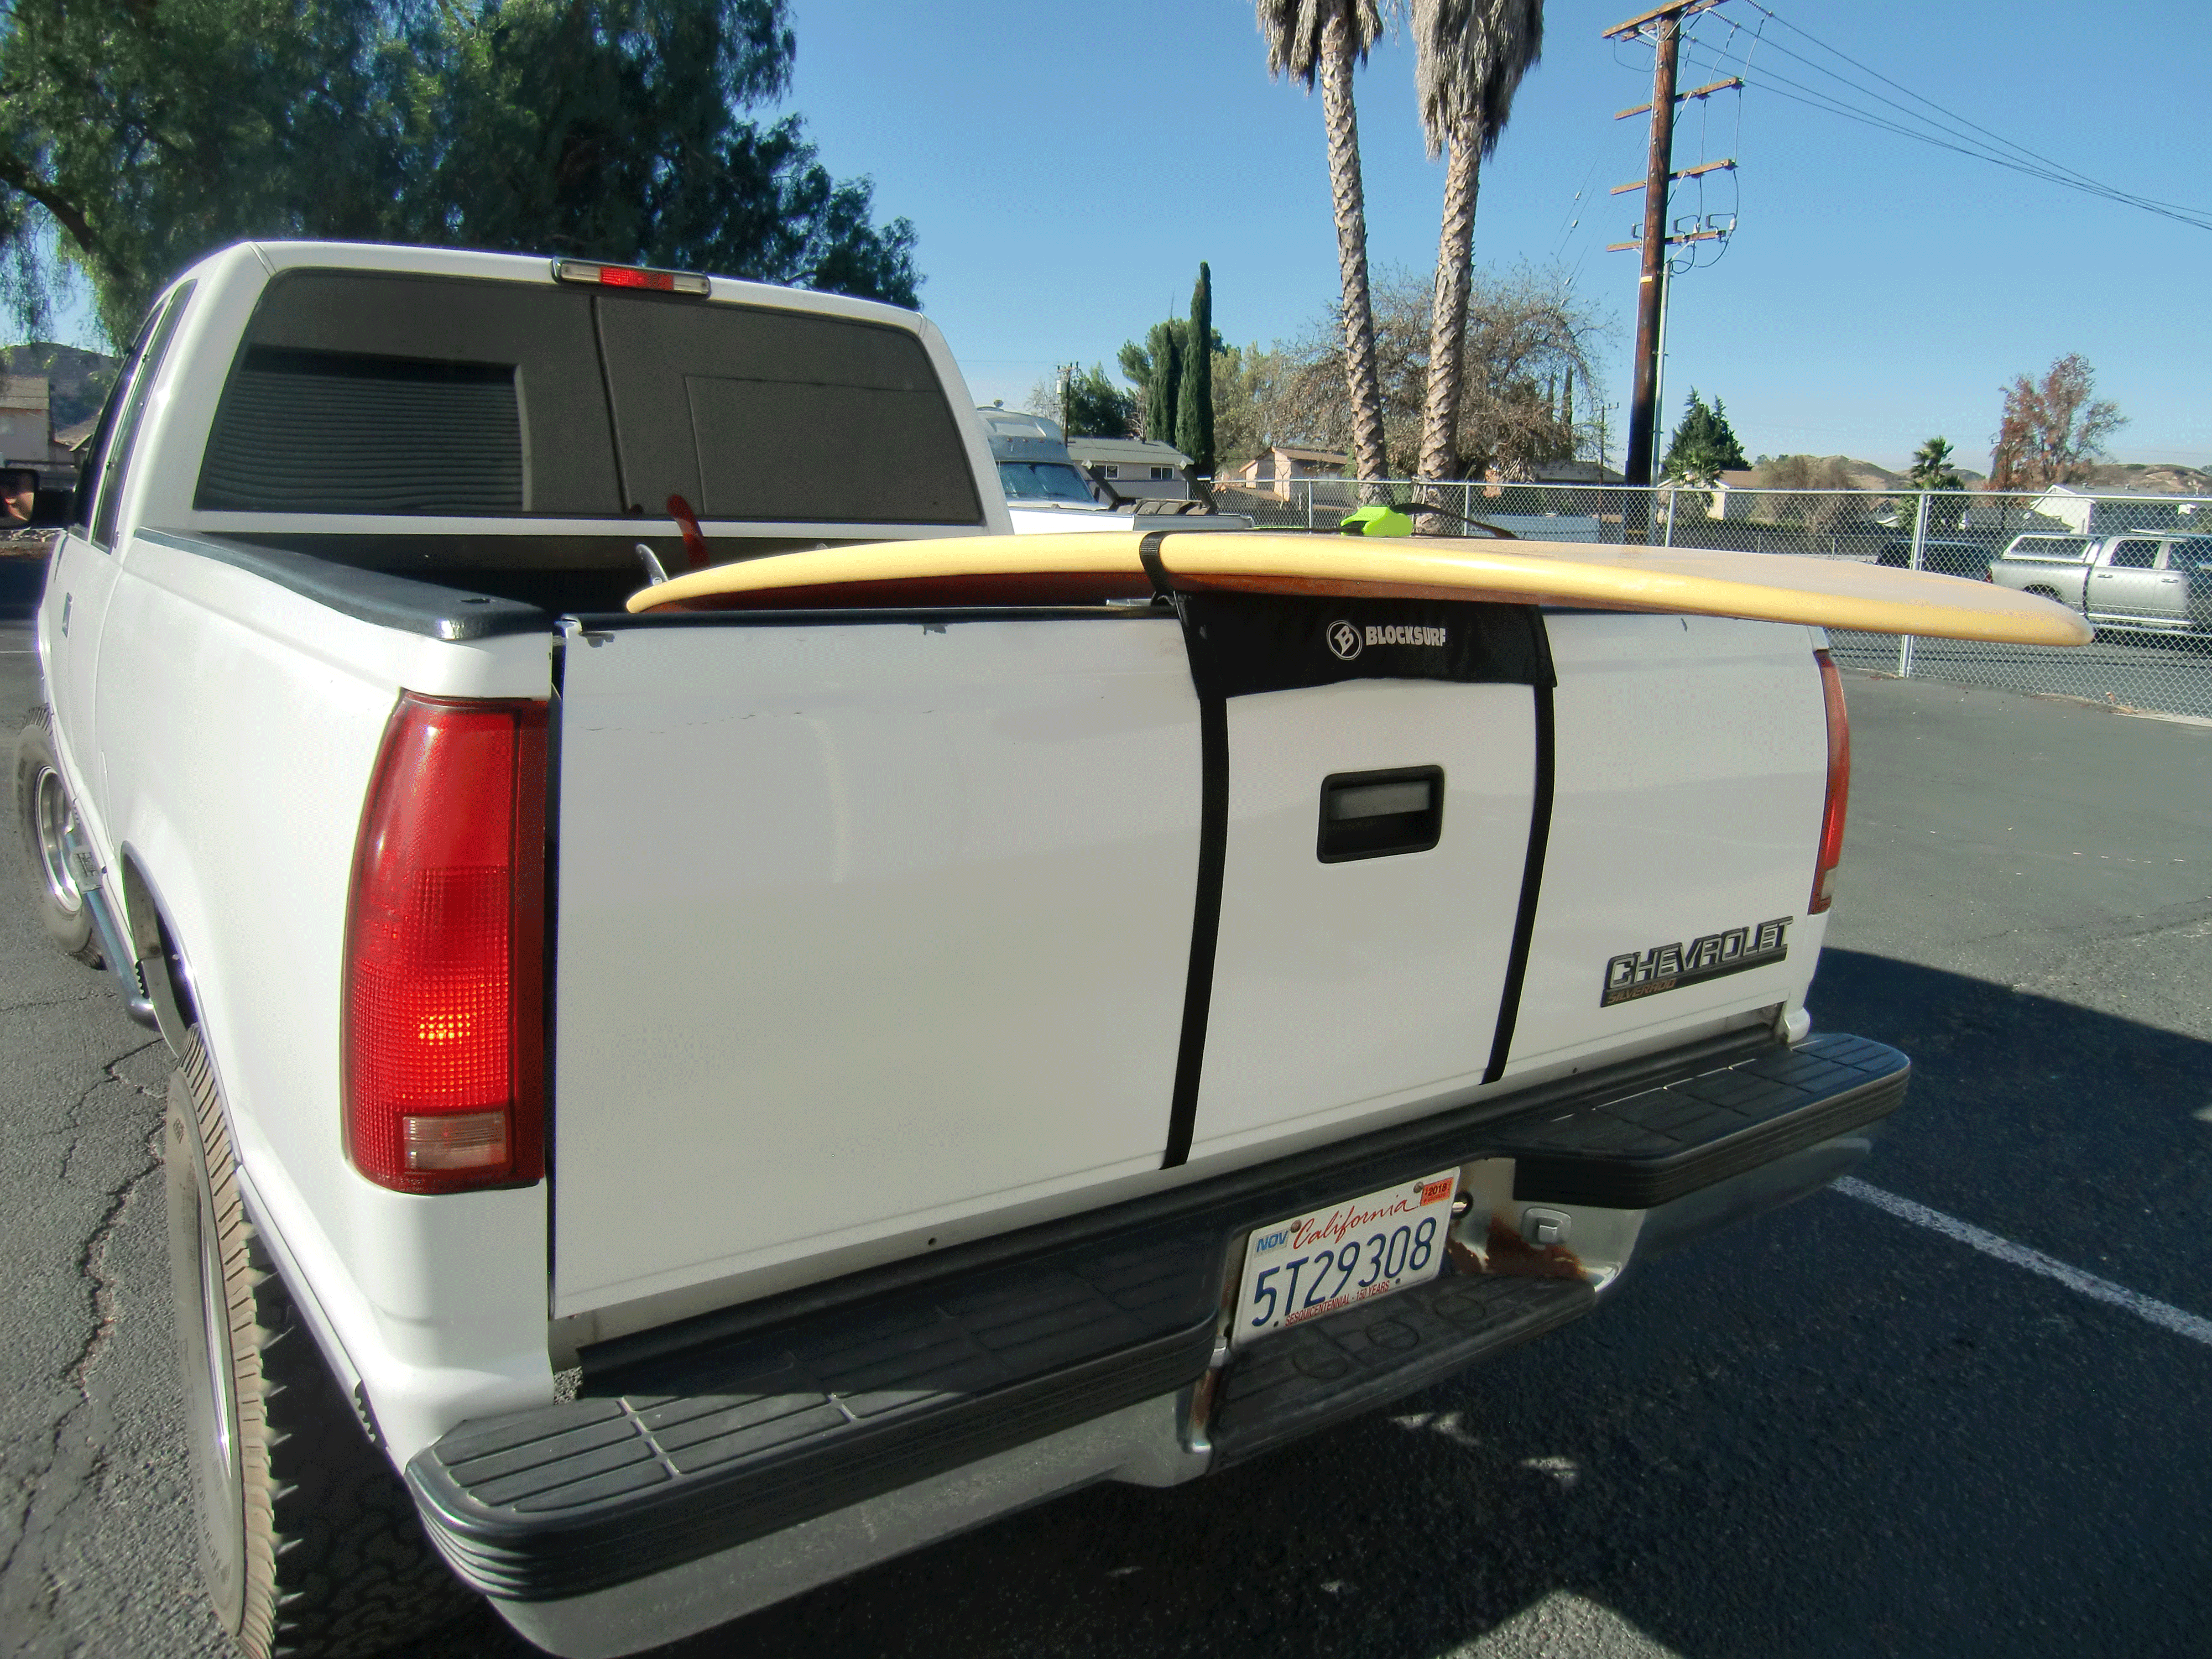 White truck with a Tailgate Rack Pad keeping a yellow surfboard off the tailgate